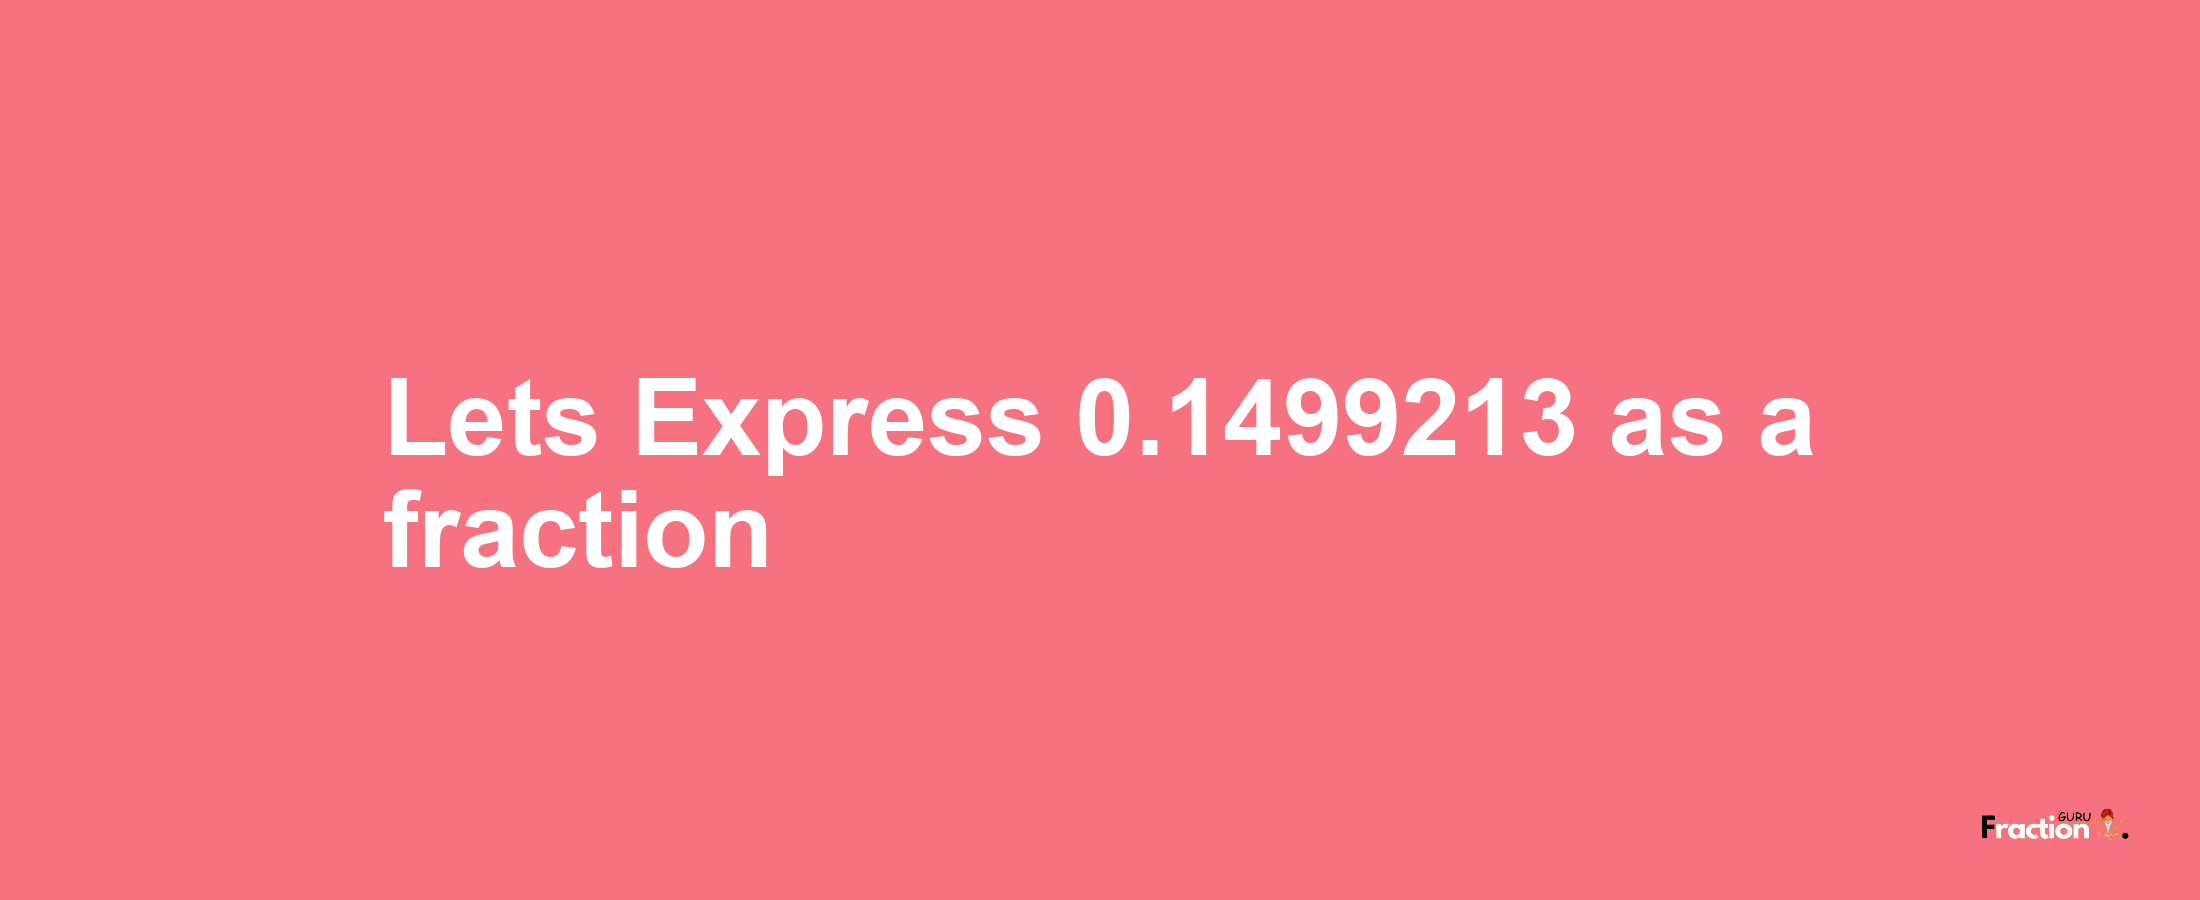 Lets Express 0.1499213 as afraction